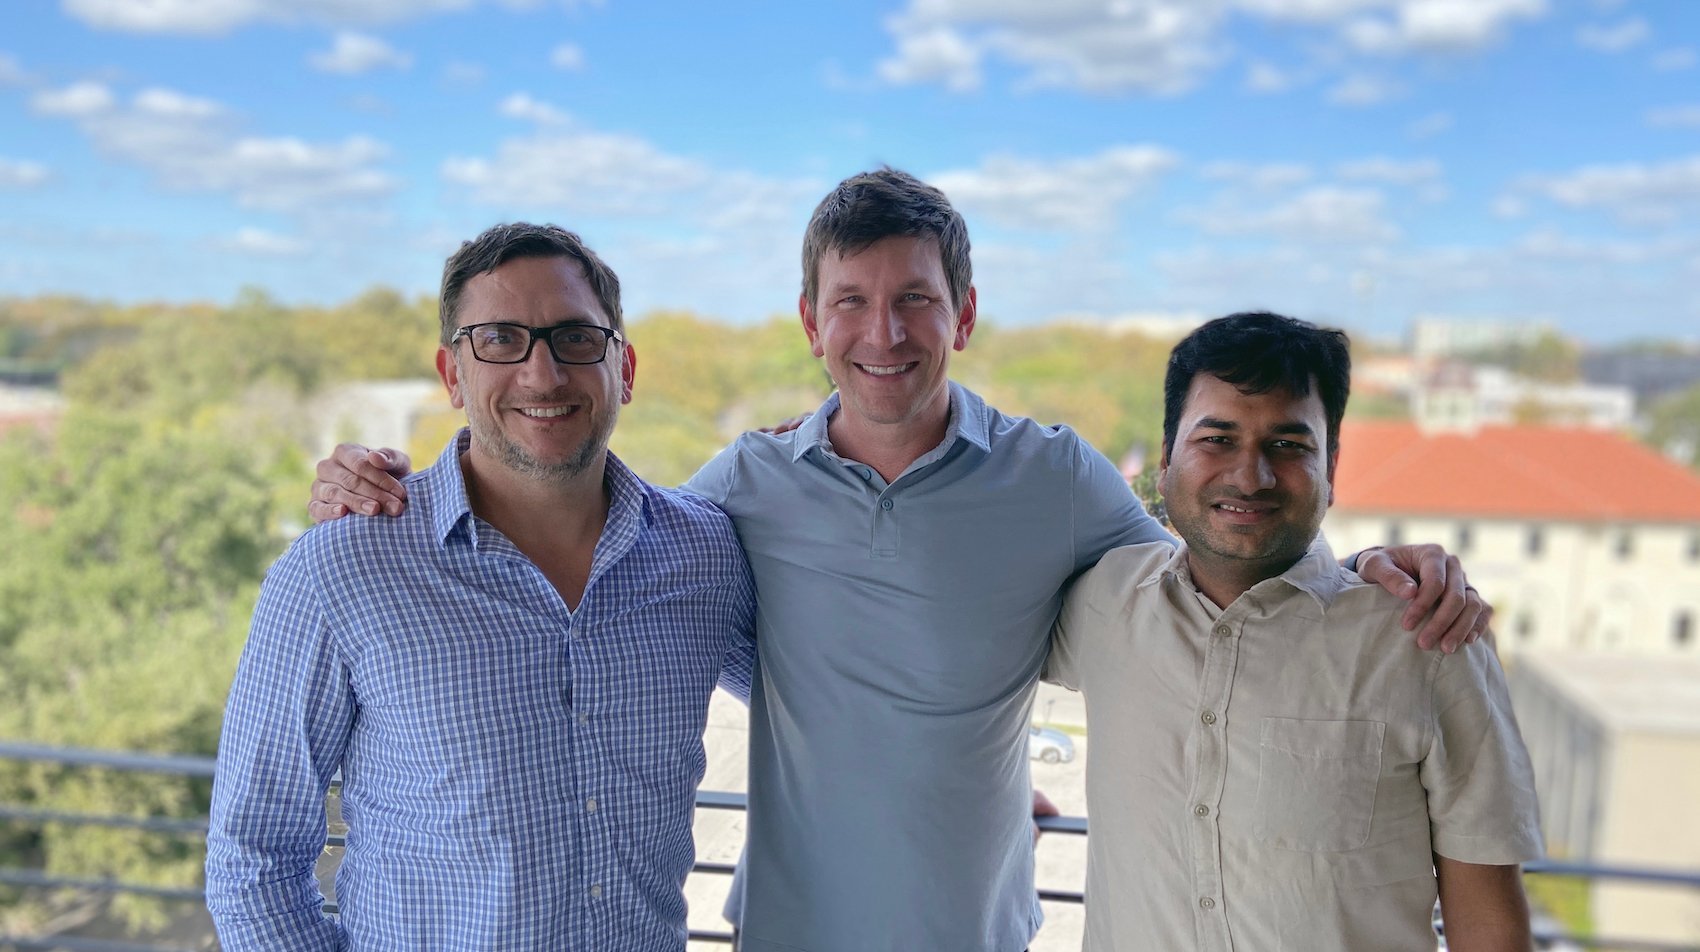 Ontic co-founders Thomas Kopecky, chief strategy office; Lukas Quanstrom, chief executive officer, and Gagan Jain, chief technology officer